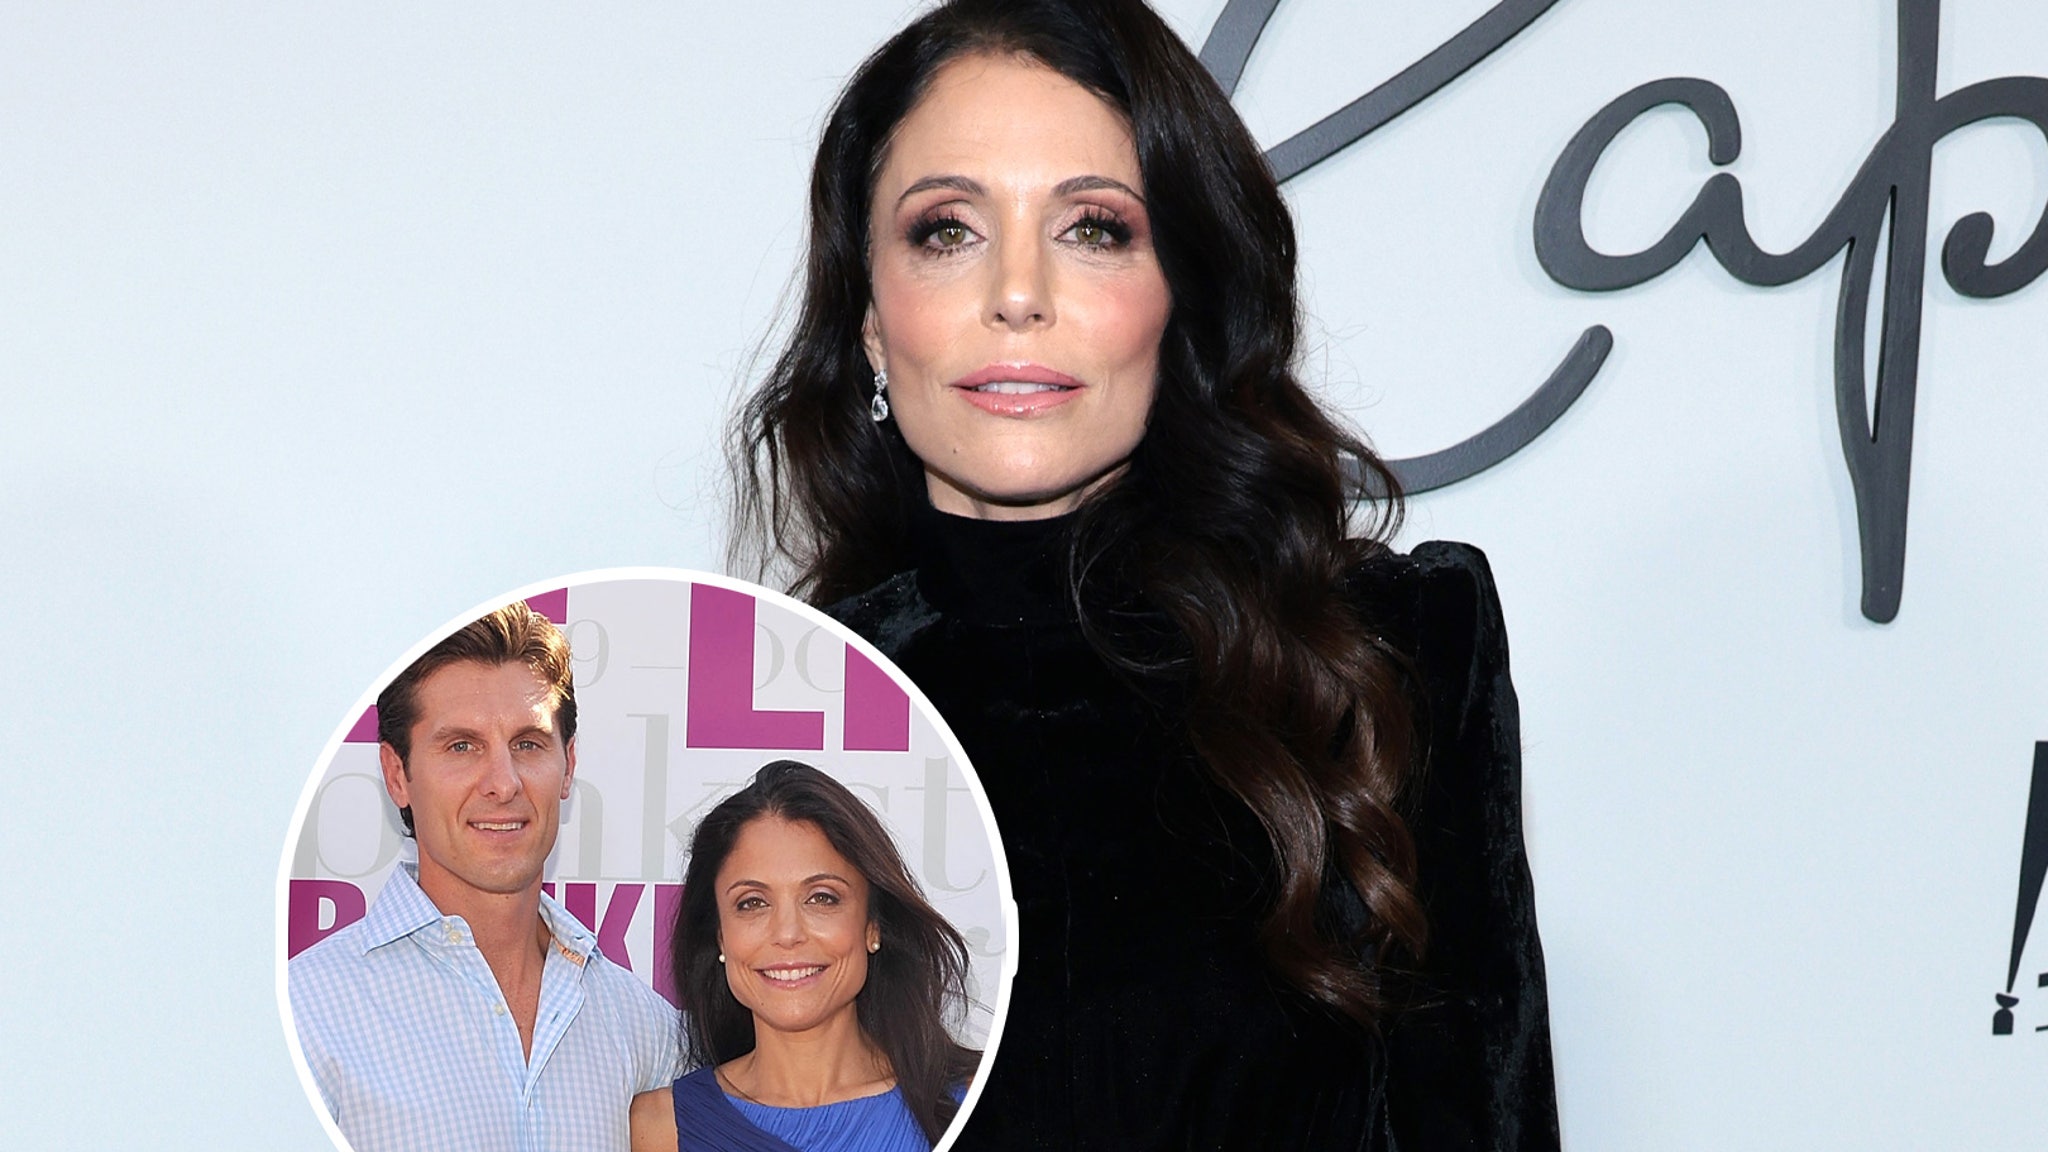 Bethenny Frankel Was 'Relieved' by Miscarriage During Marriage To Jason Hoppy